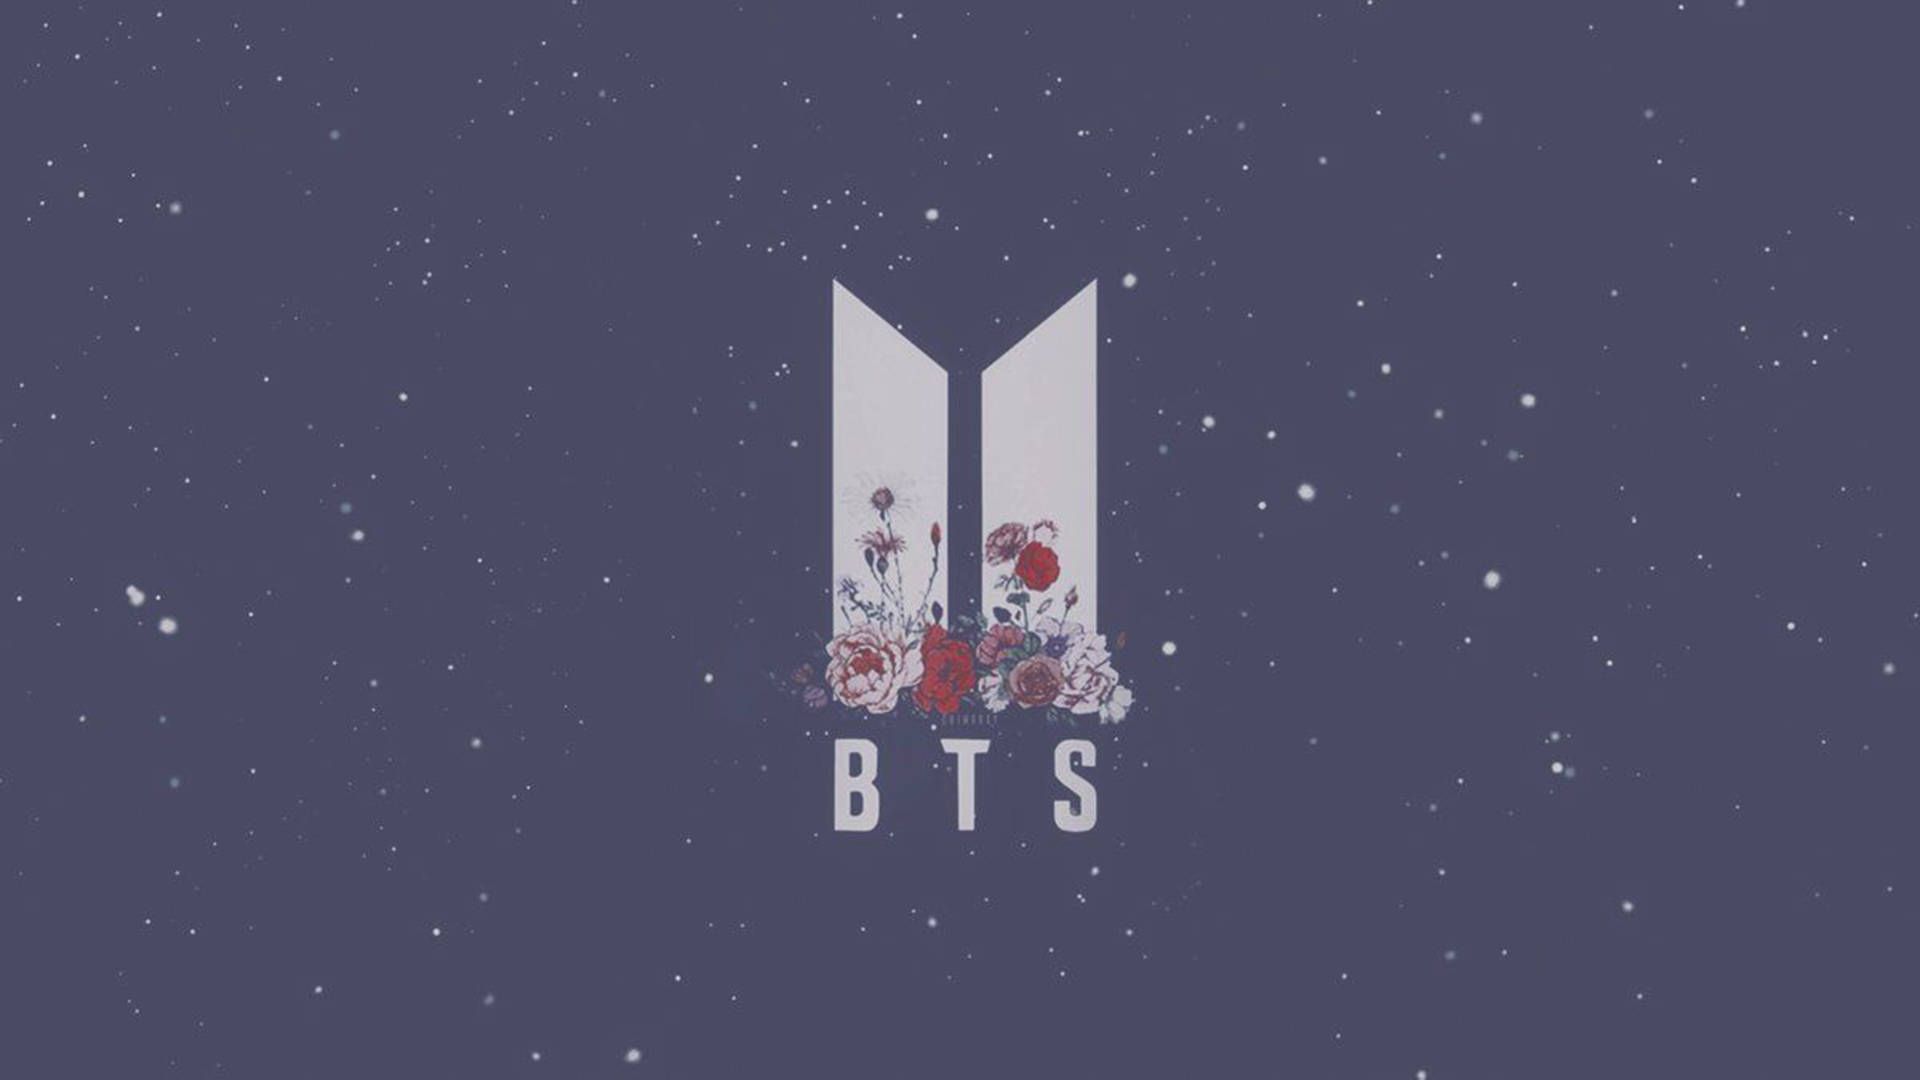 A dark purple background with white stars. The BTS logo is in the center of the image. The letters 